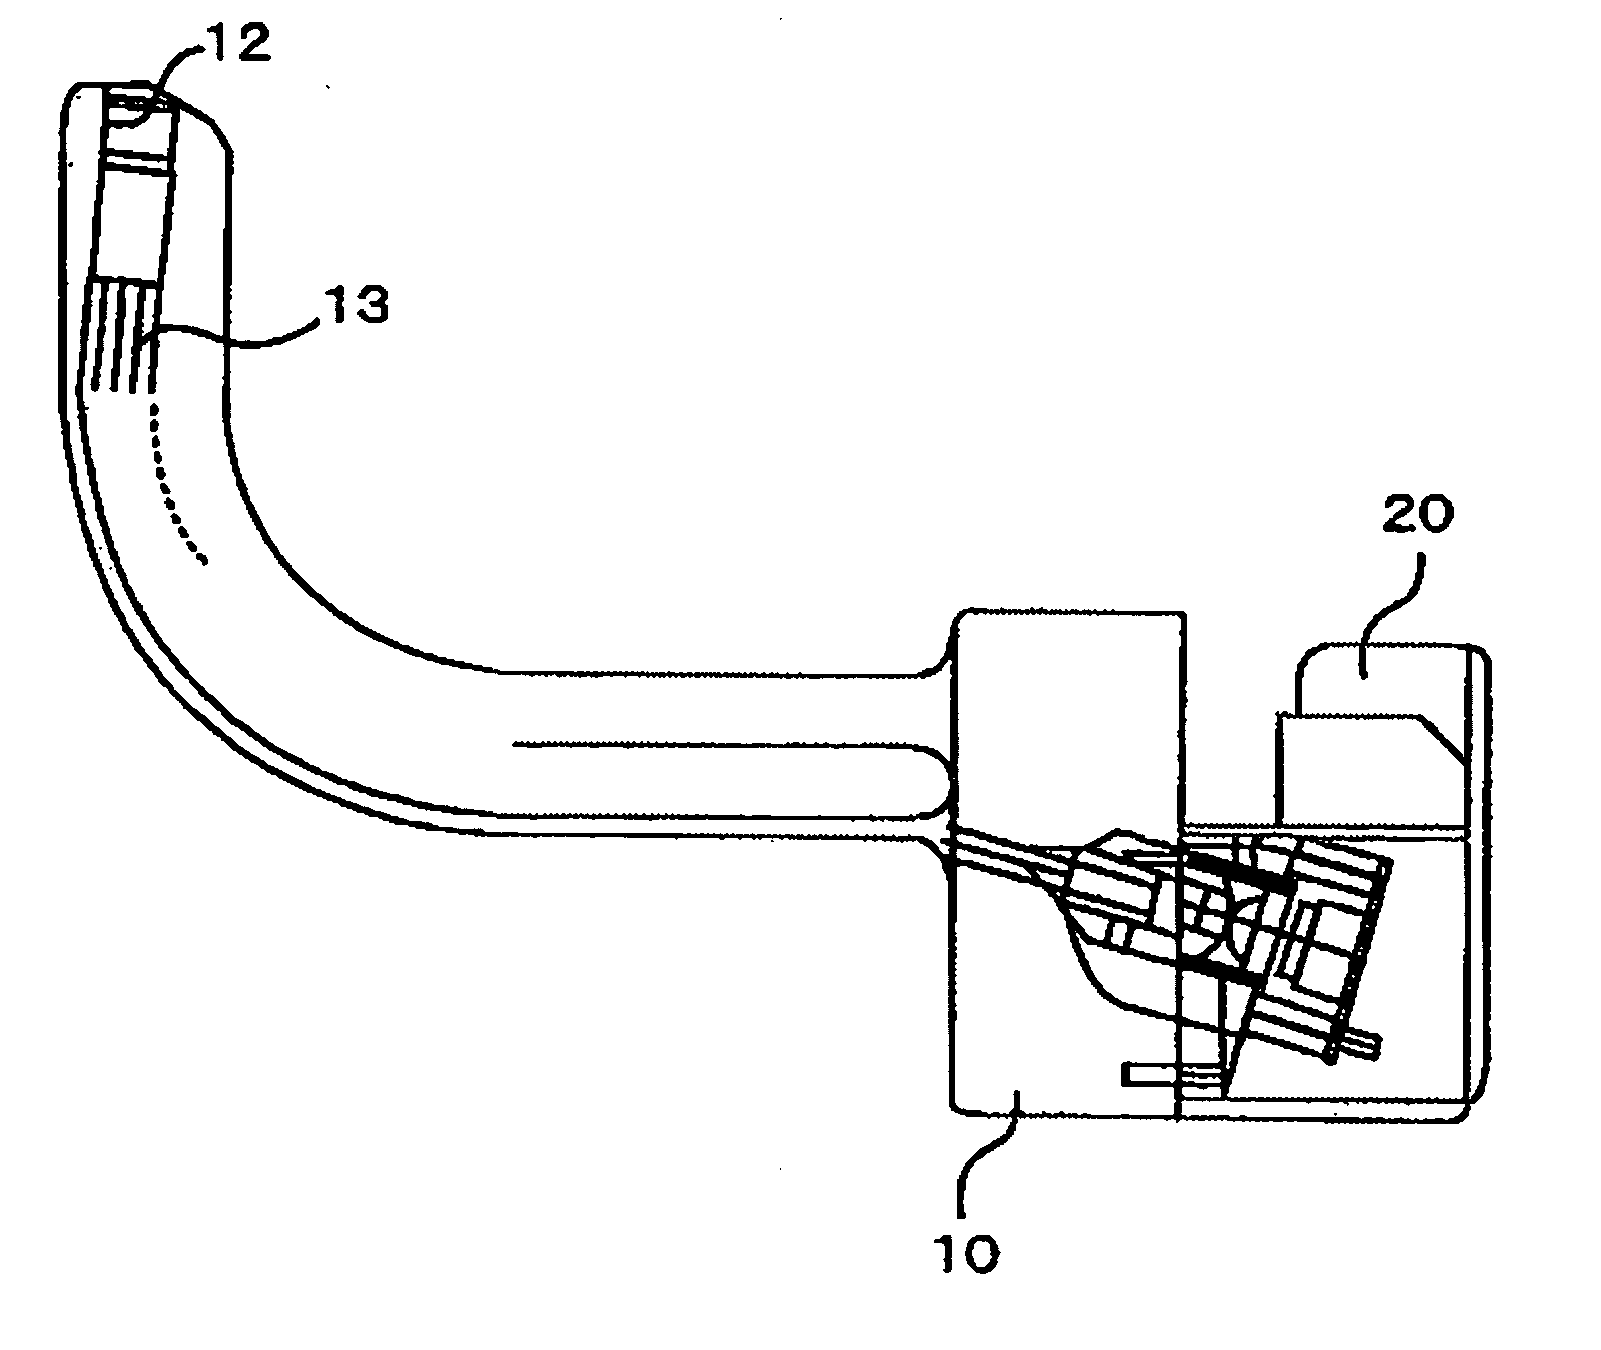 Oral airway and airway management assistive device provided with the oral airway